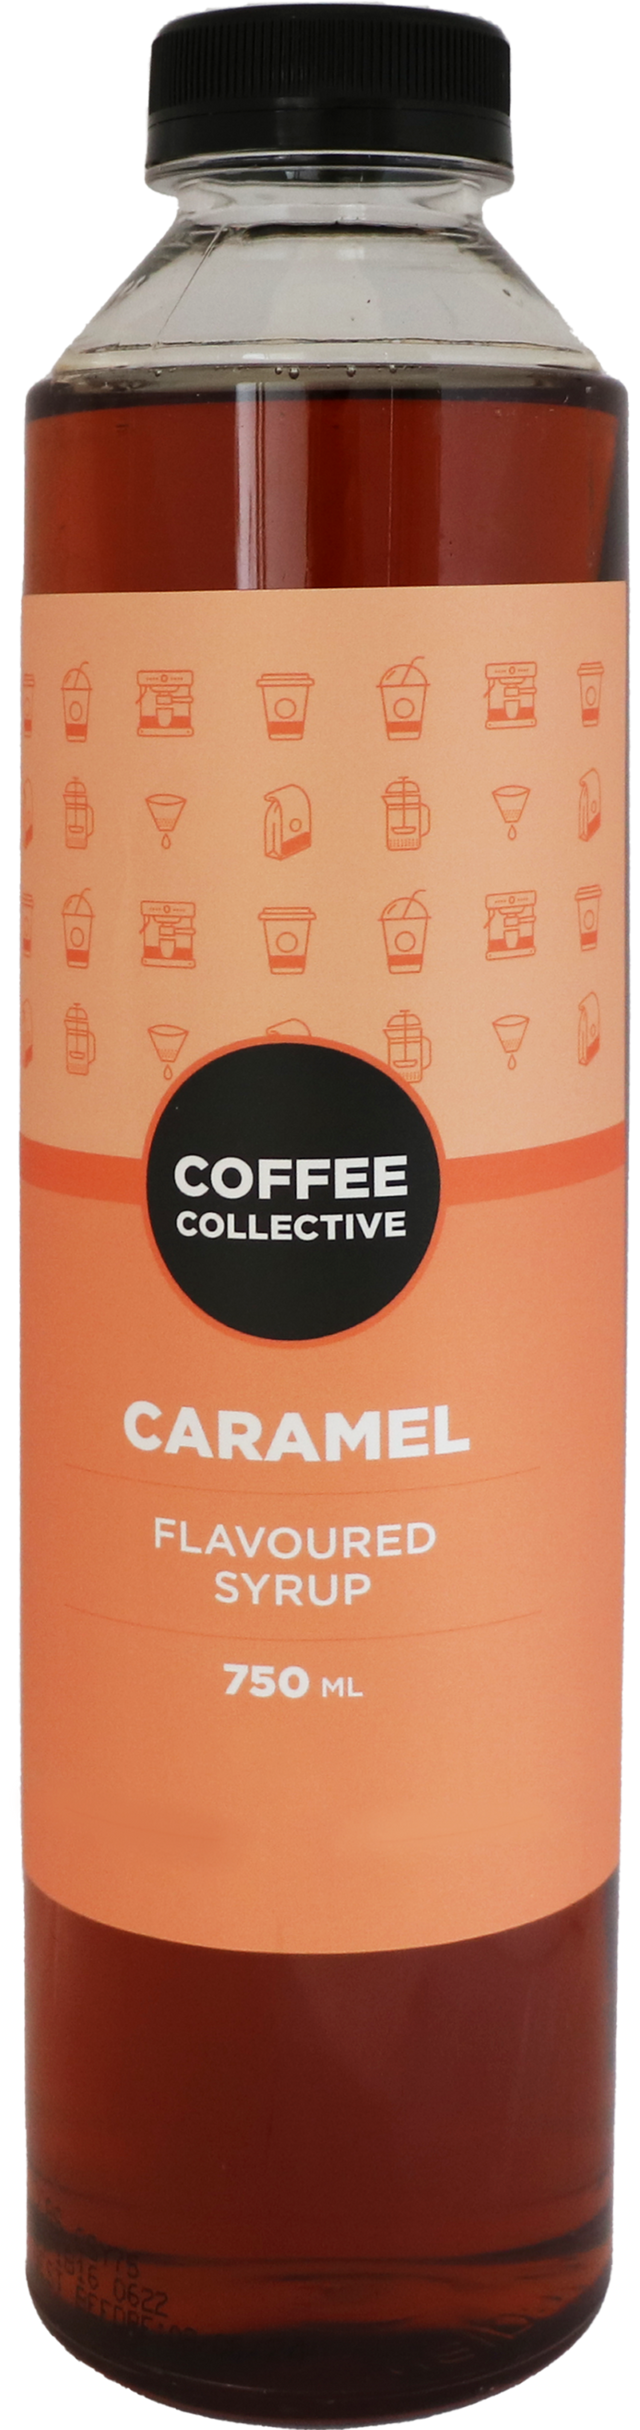 Coffee Collective Syrup - Caramel - 750ml Bottle